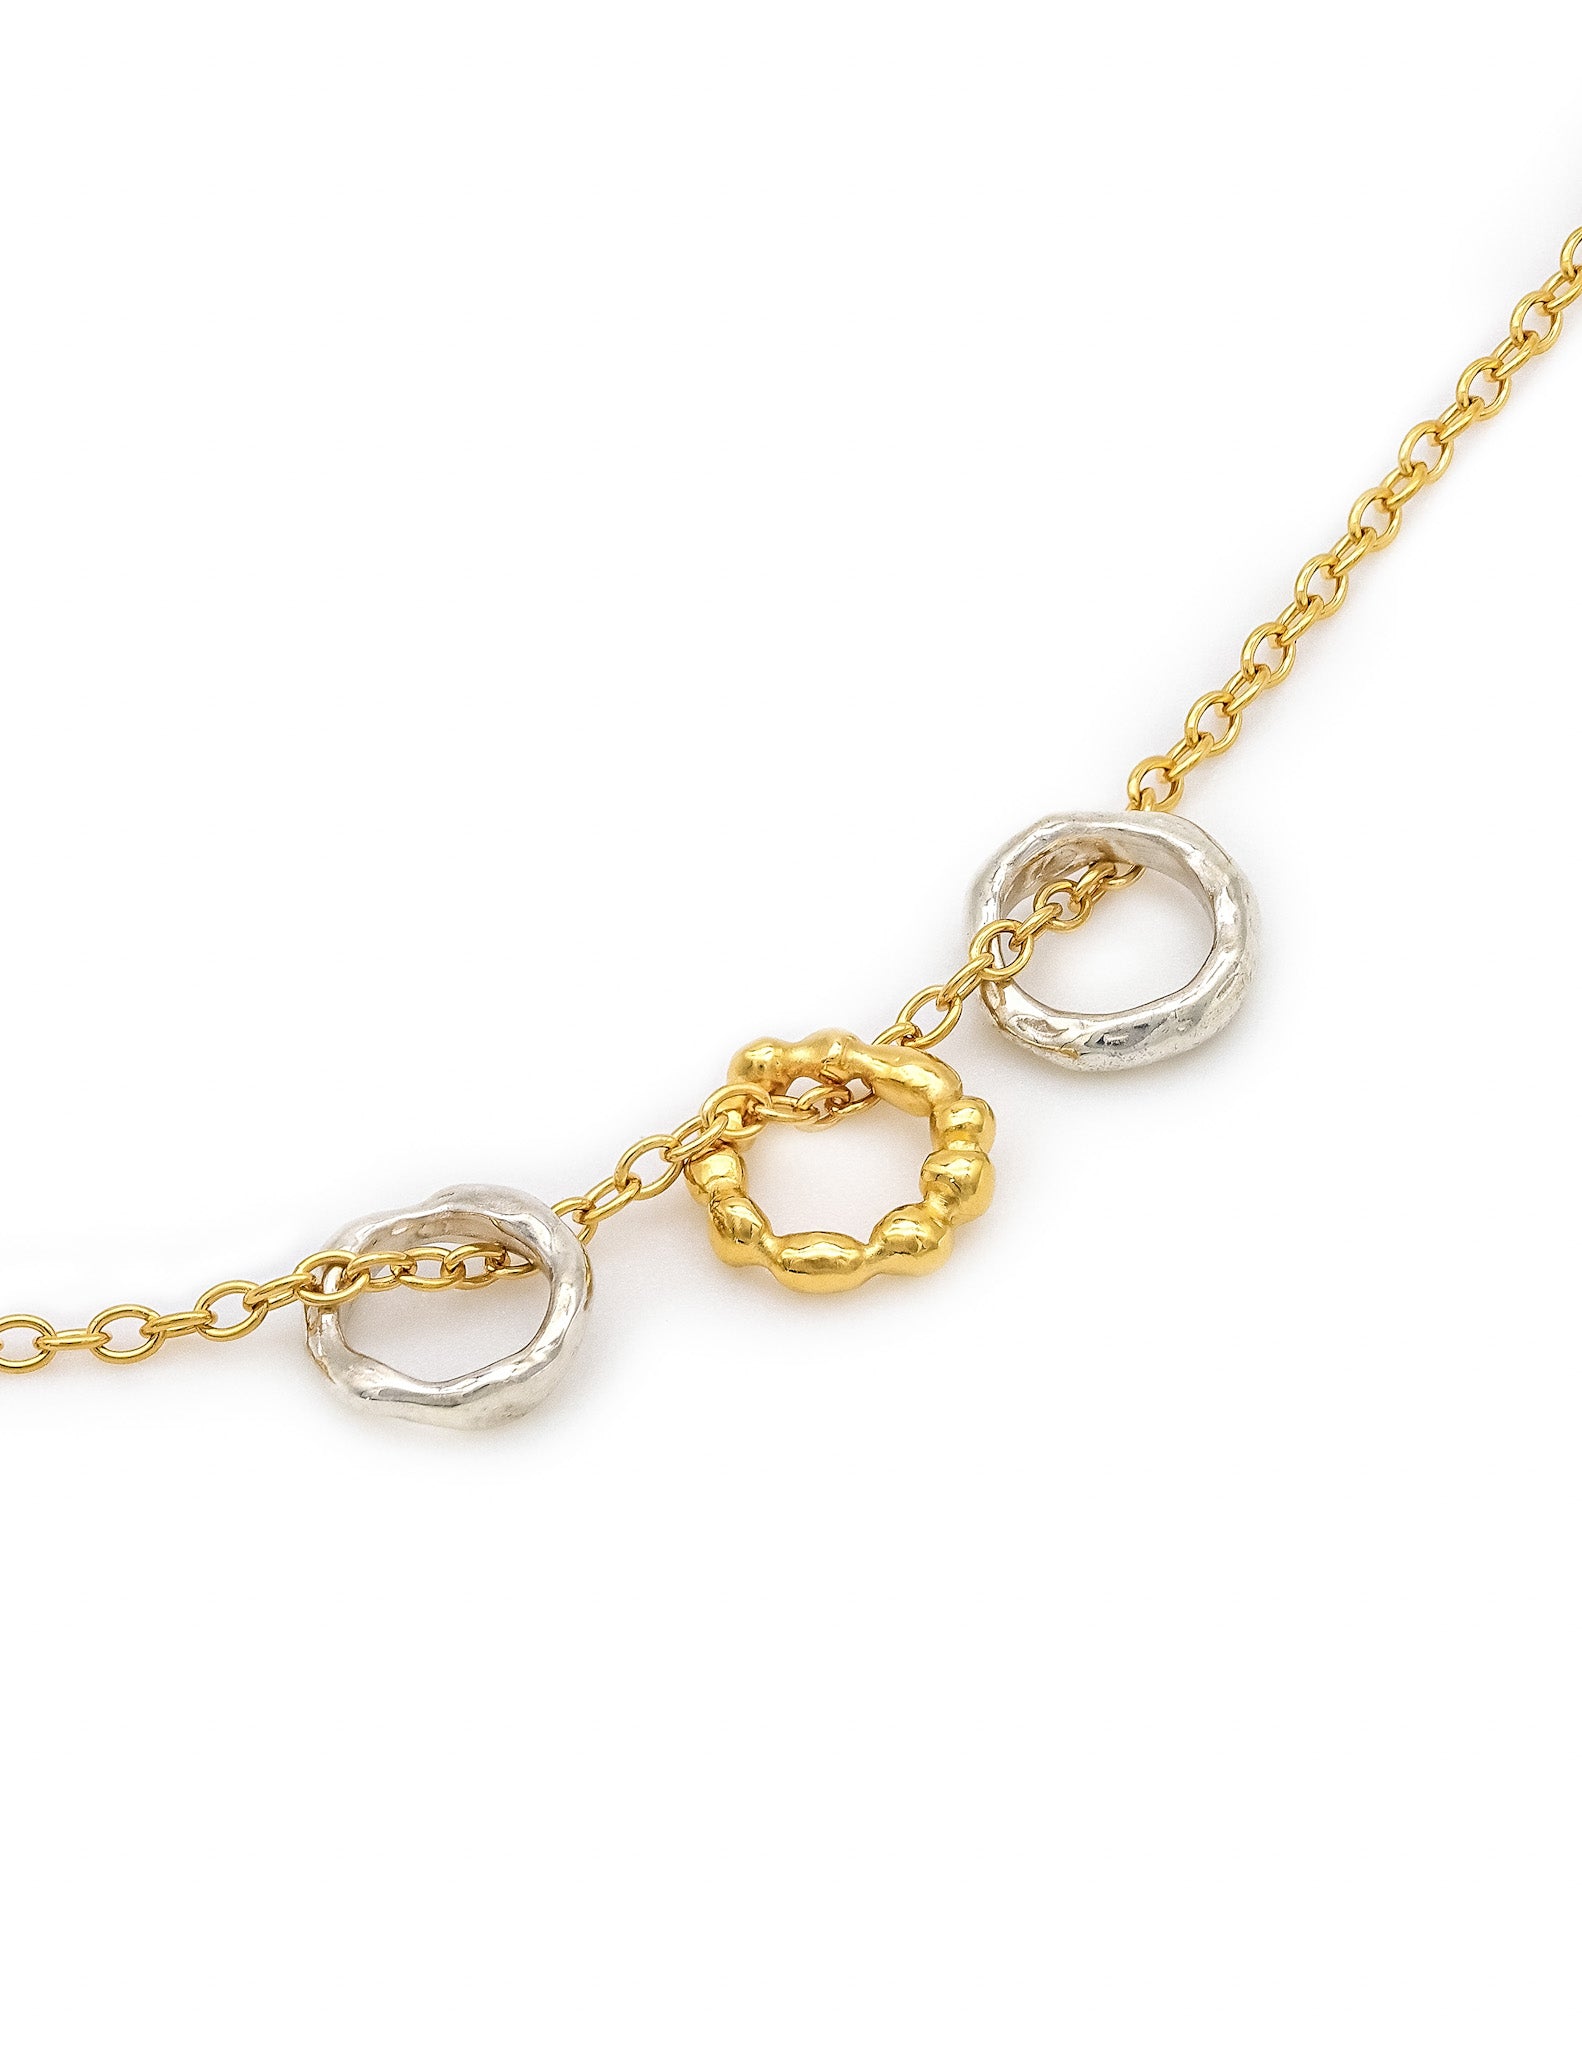 Kharys jewelry two tone wave necklace in sterling silver and 18k gold vermeil